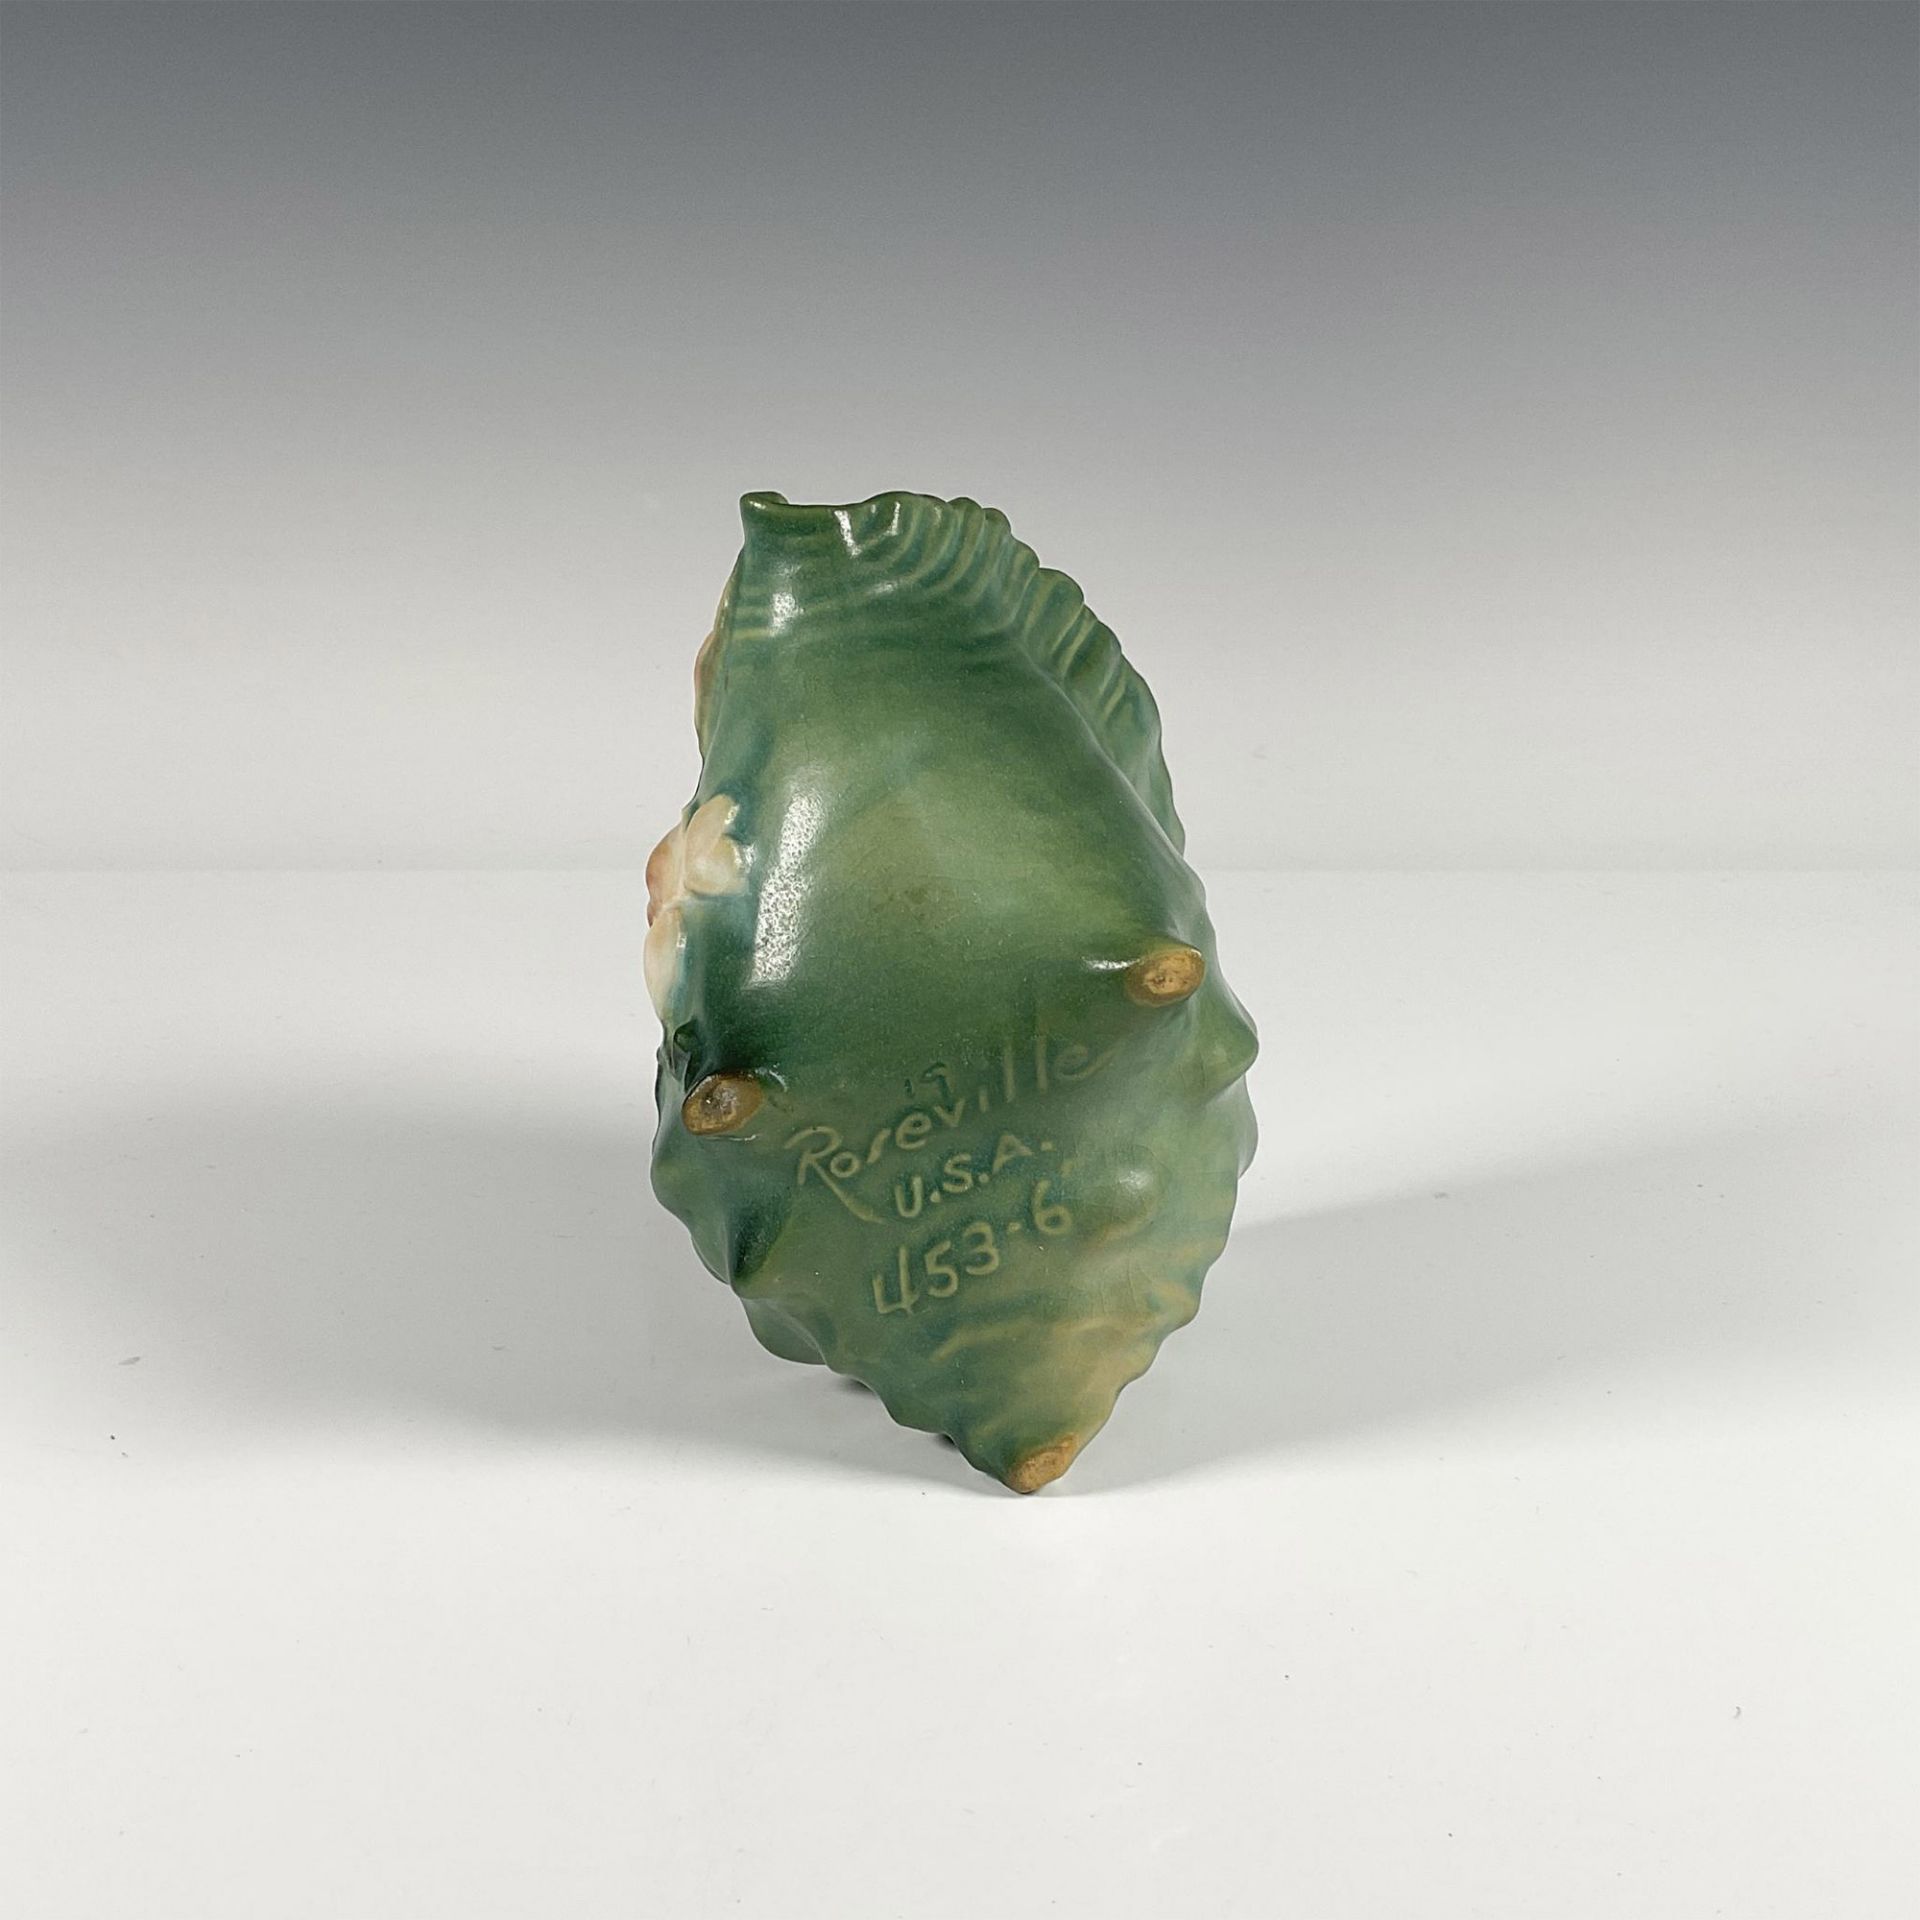 Roseville Pottery, Green Magnolia Conch Shell Vase 453 - Image 3 of 3